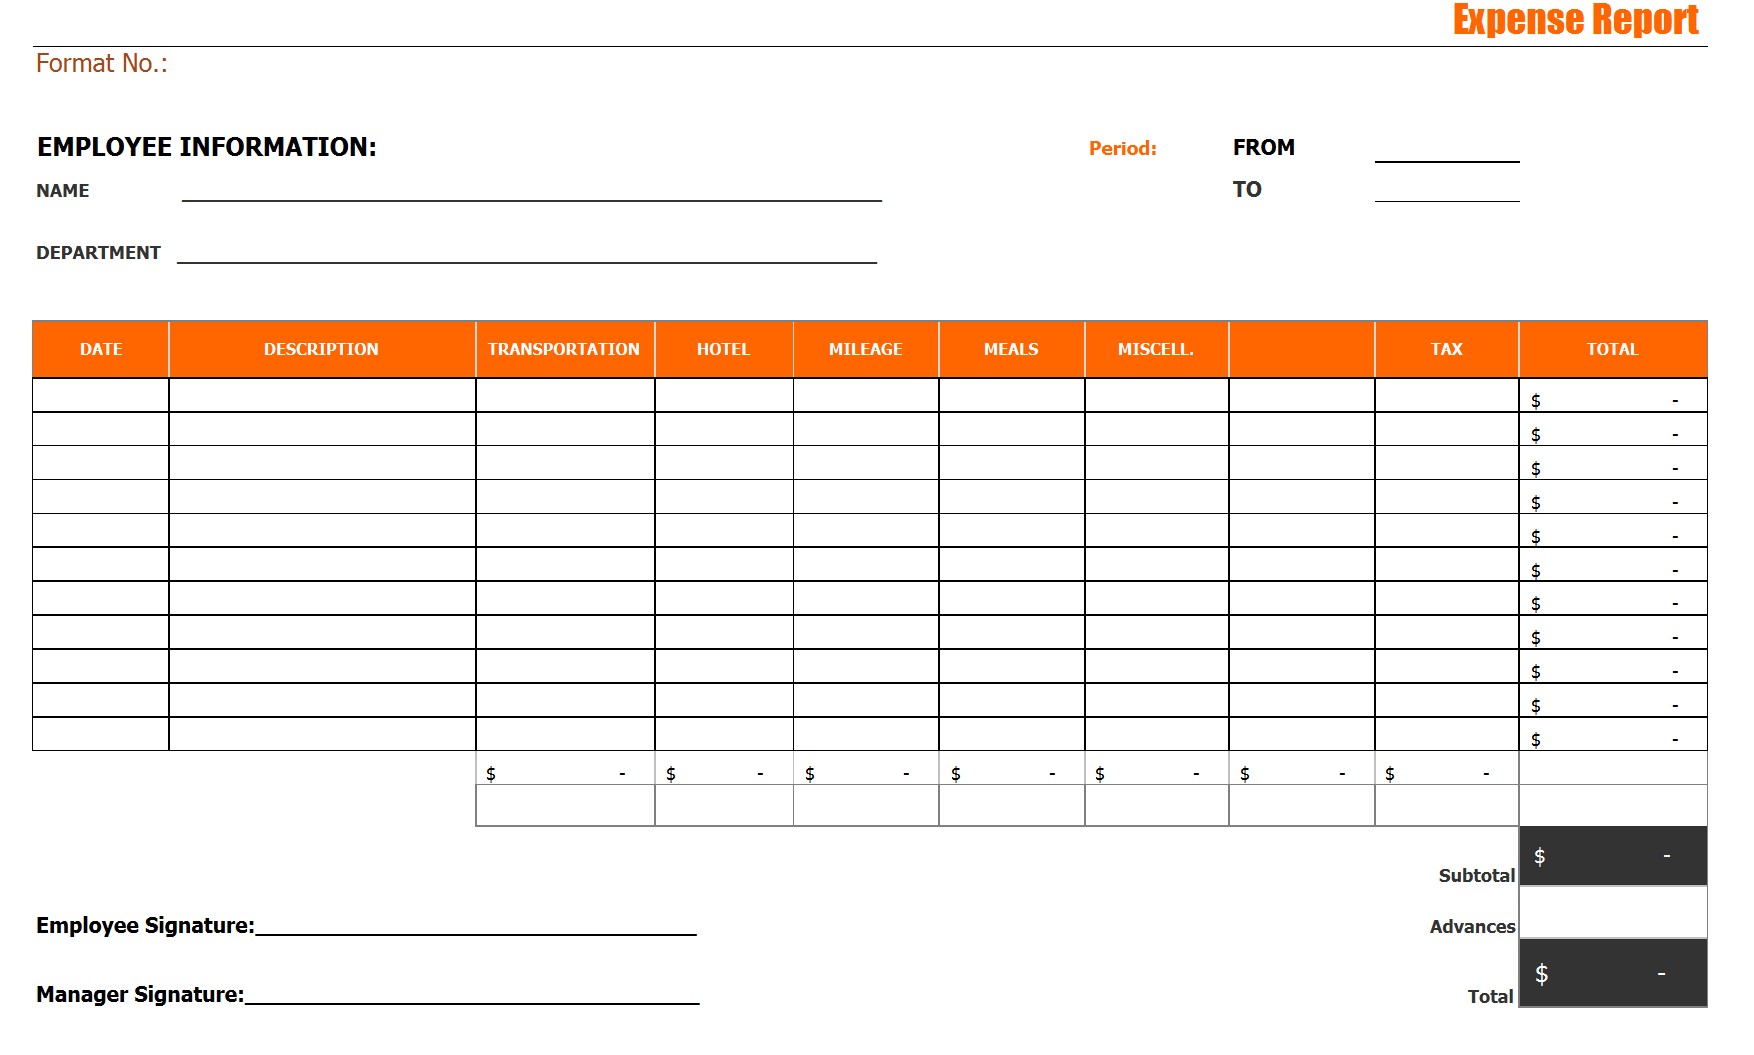 Basic Monthly Expense Report Template With Blank Form And Regarding Daily Expense Report Template